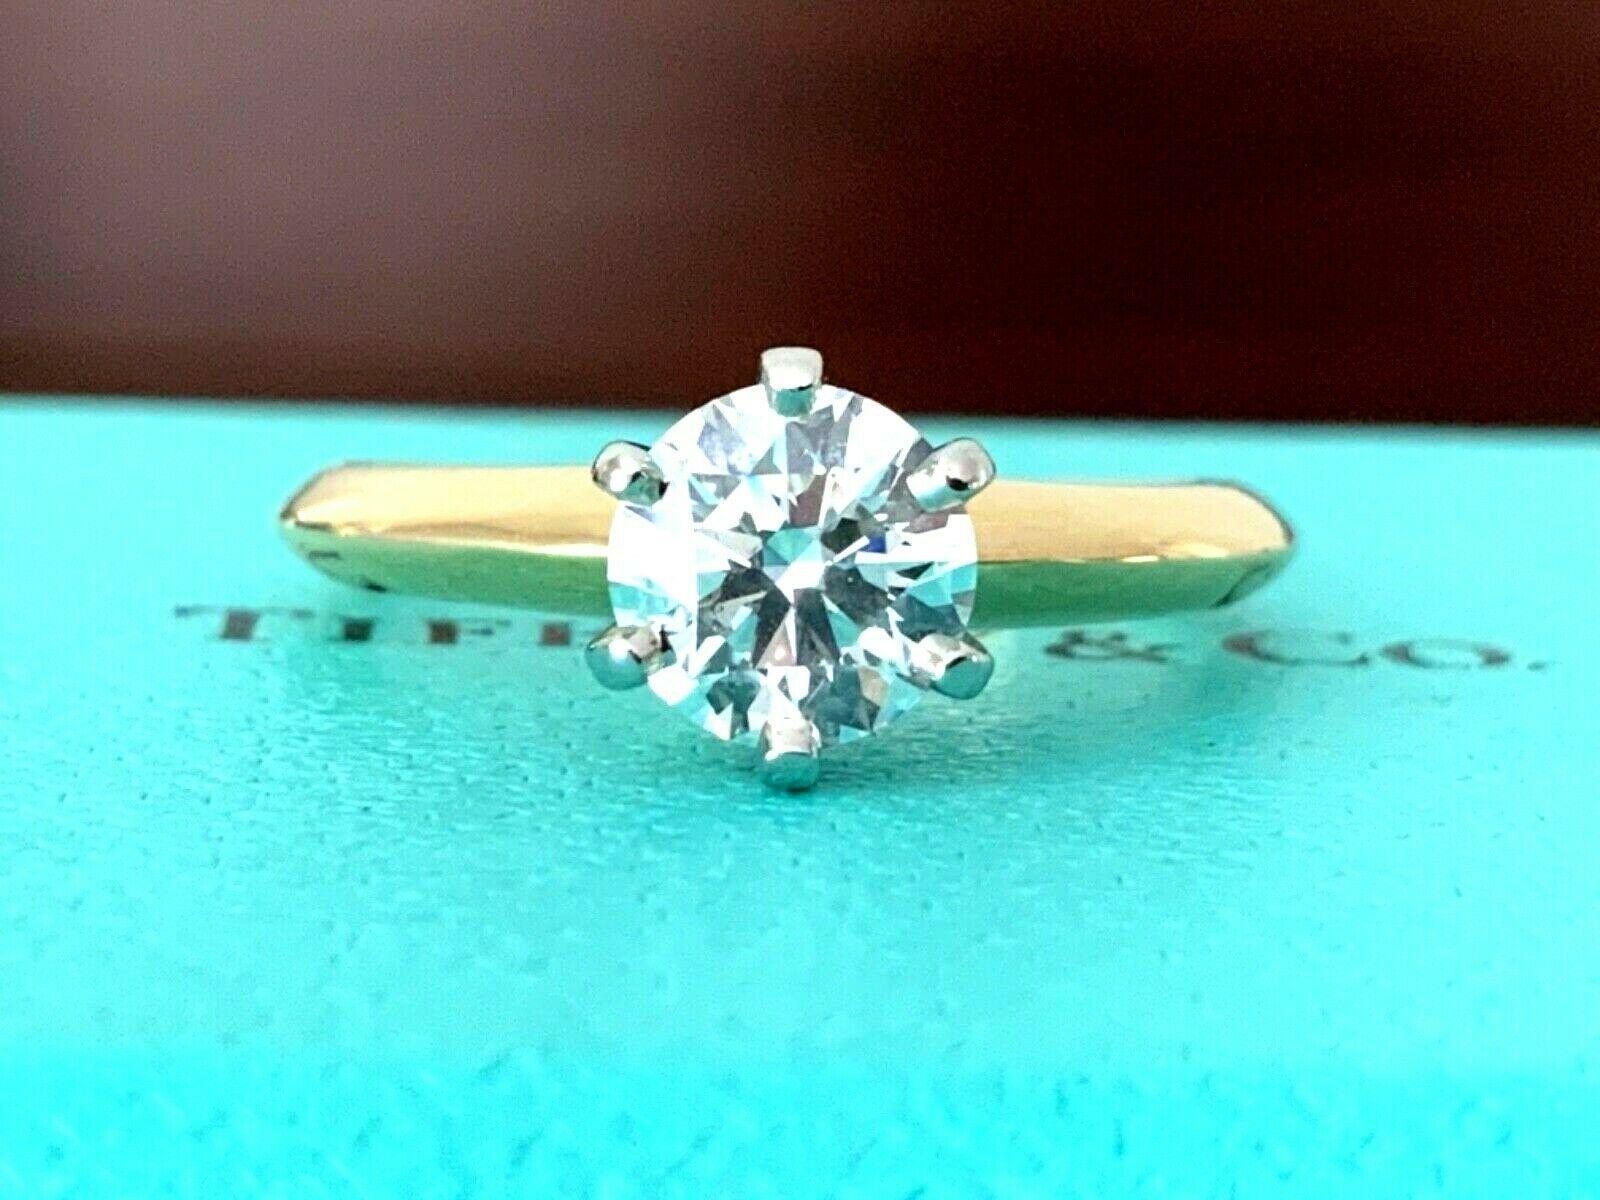 JUST IN TODAY!  

Are you looking for the HOTTEST HARDEST to find Tiffany round sold today?

Well you just found it - the Tiffany & Co Classic round set in the hard to find 18k Yellow Gold!  99% of all Tiffany Preowned Round Classic engagement rings